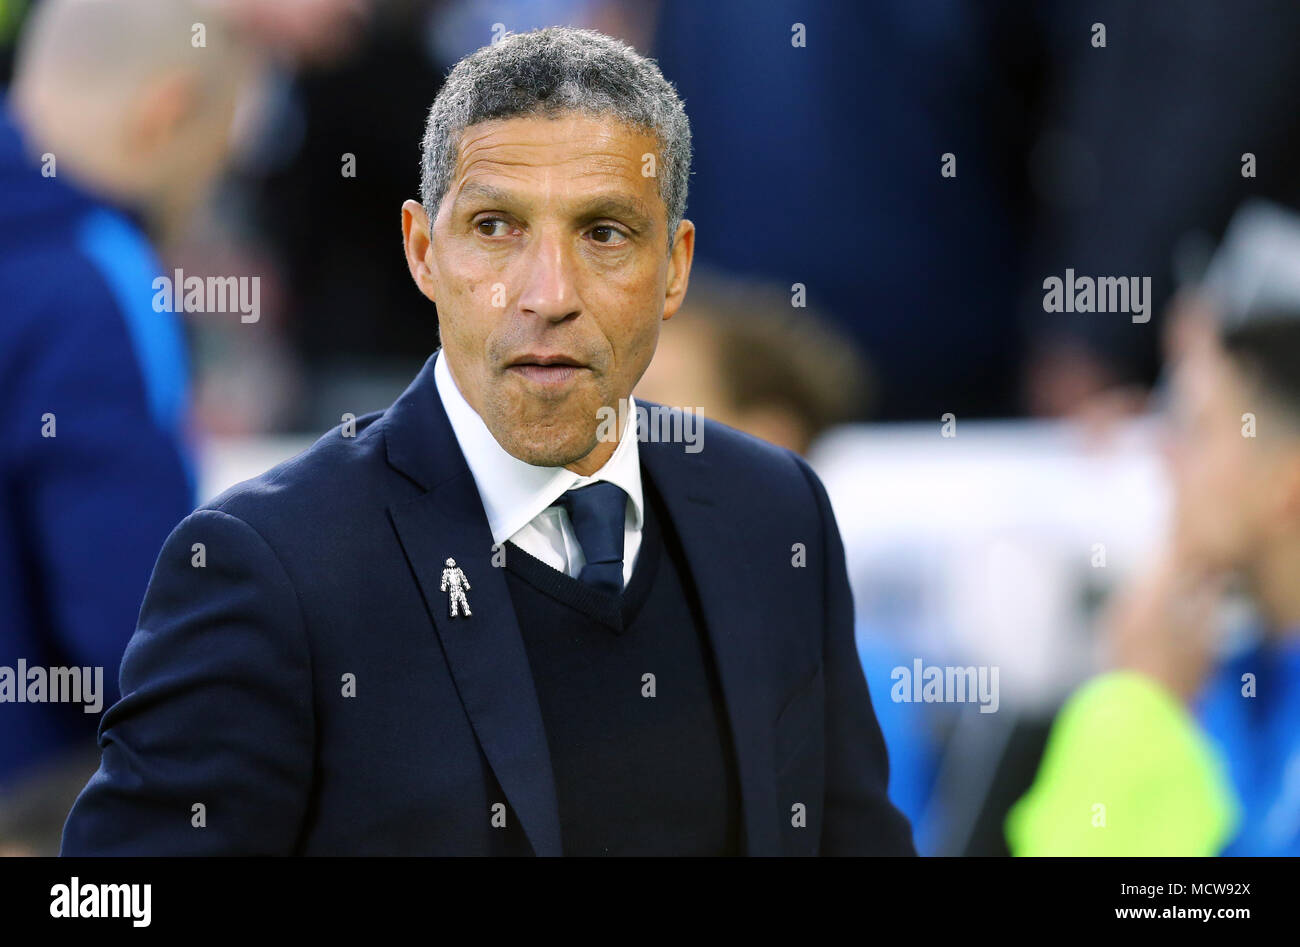 Brighton & Hove Albion manager Chris Hughton during the Premier League match at the AMEX Stadium, Brighton. PRESS ASSOCIATION Photo. Picture date: Tuesday April 17, 2018. See PA story SOCCER Brighton. Photo credit should read: Gareth Fuller/PA Wire. RESTRICTIONS: No use with unauthorised audio, video, data, fixture lists, club/league logos or 'live' services. Online in-match use limited to 75 images, no video emulation. No use in betting, games or single club/league/player publications. Stock Photo